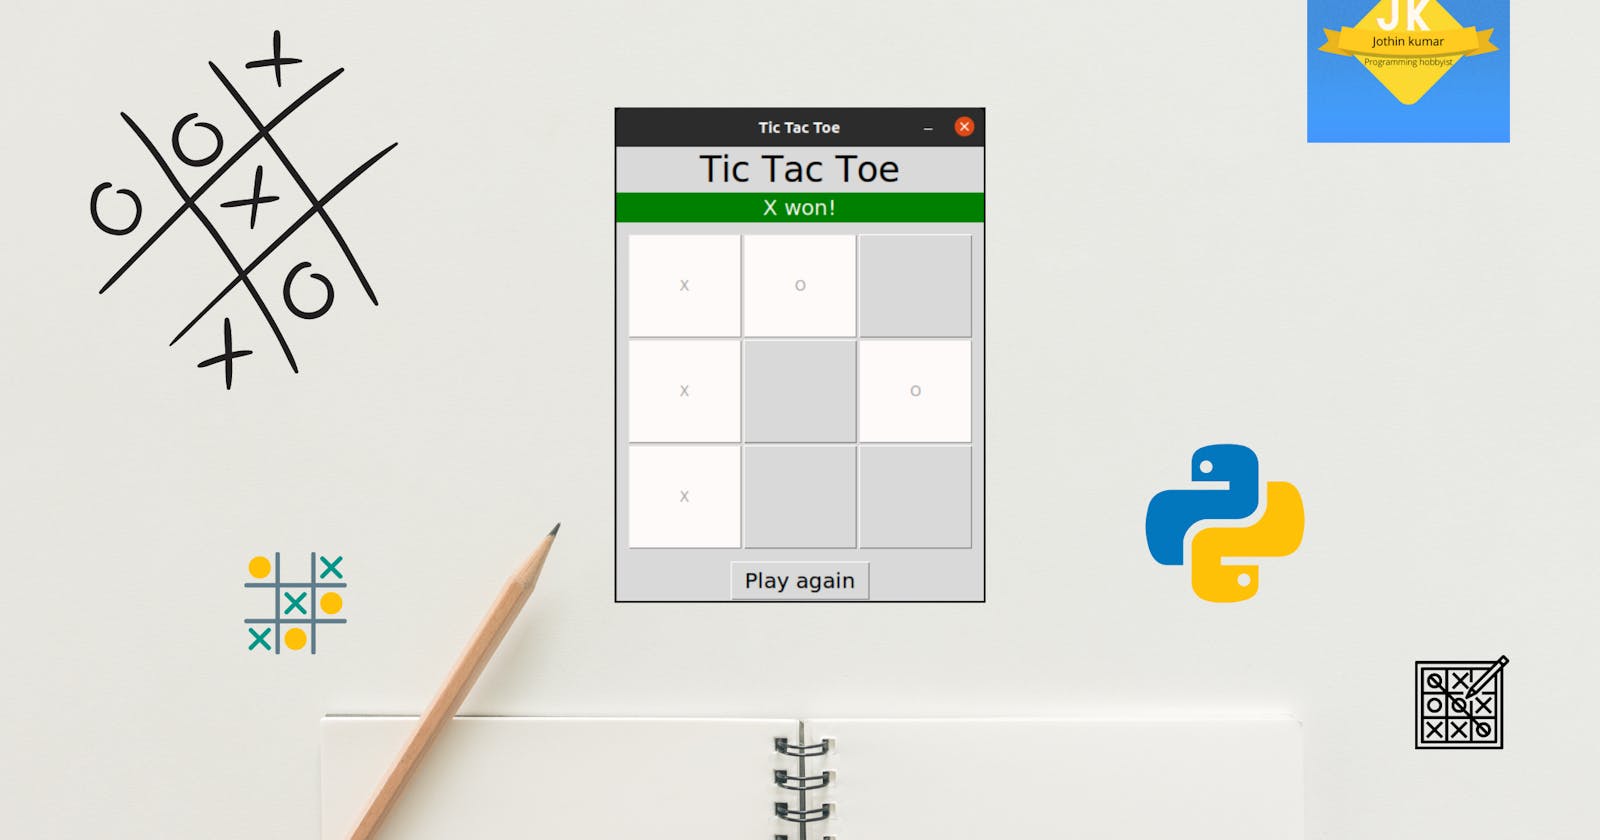 Tic Tac Toe 🎮 with Python tkinter - part 2